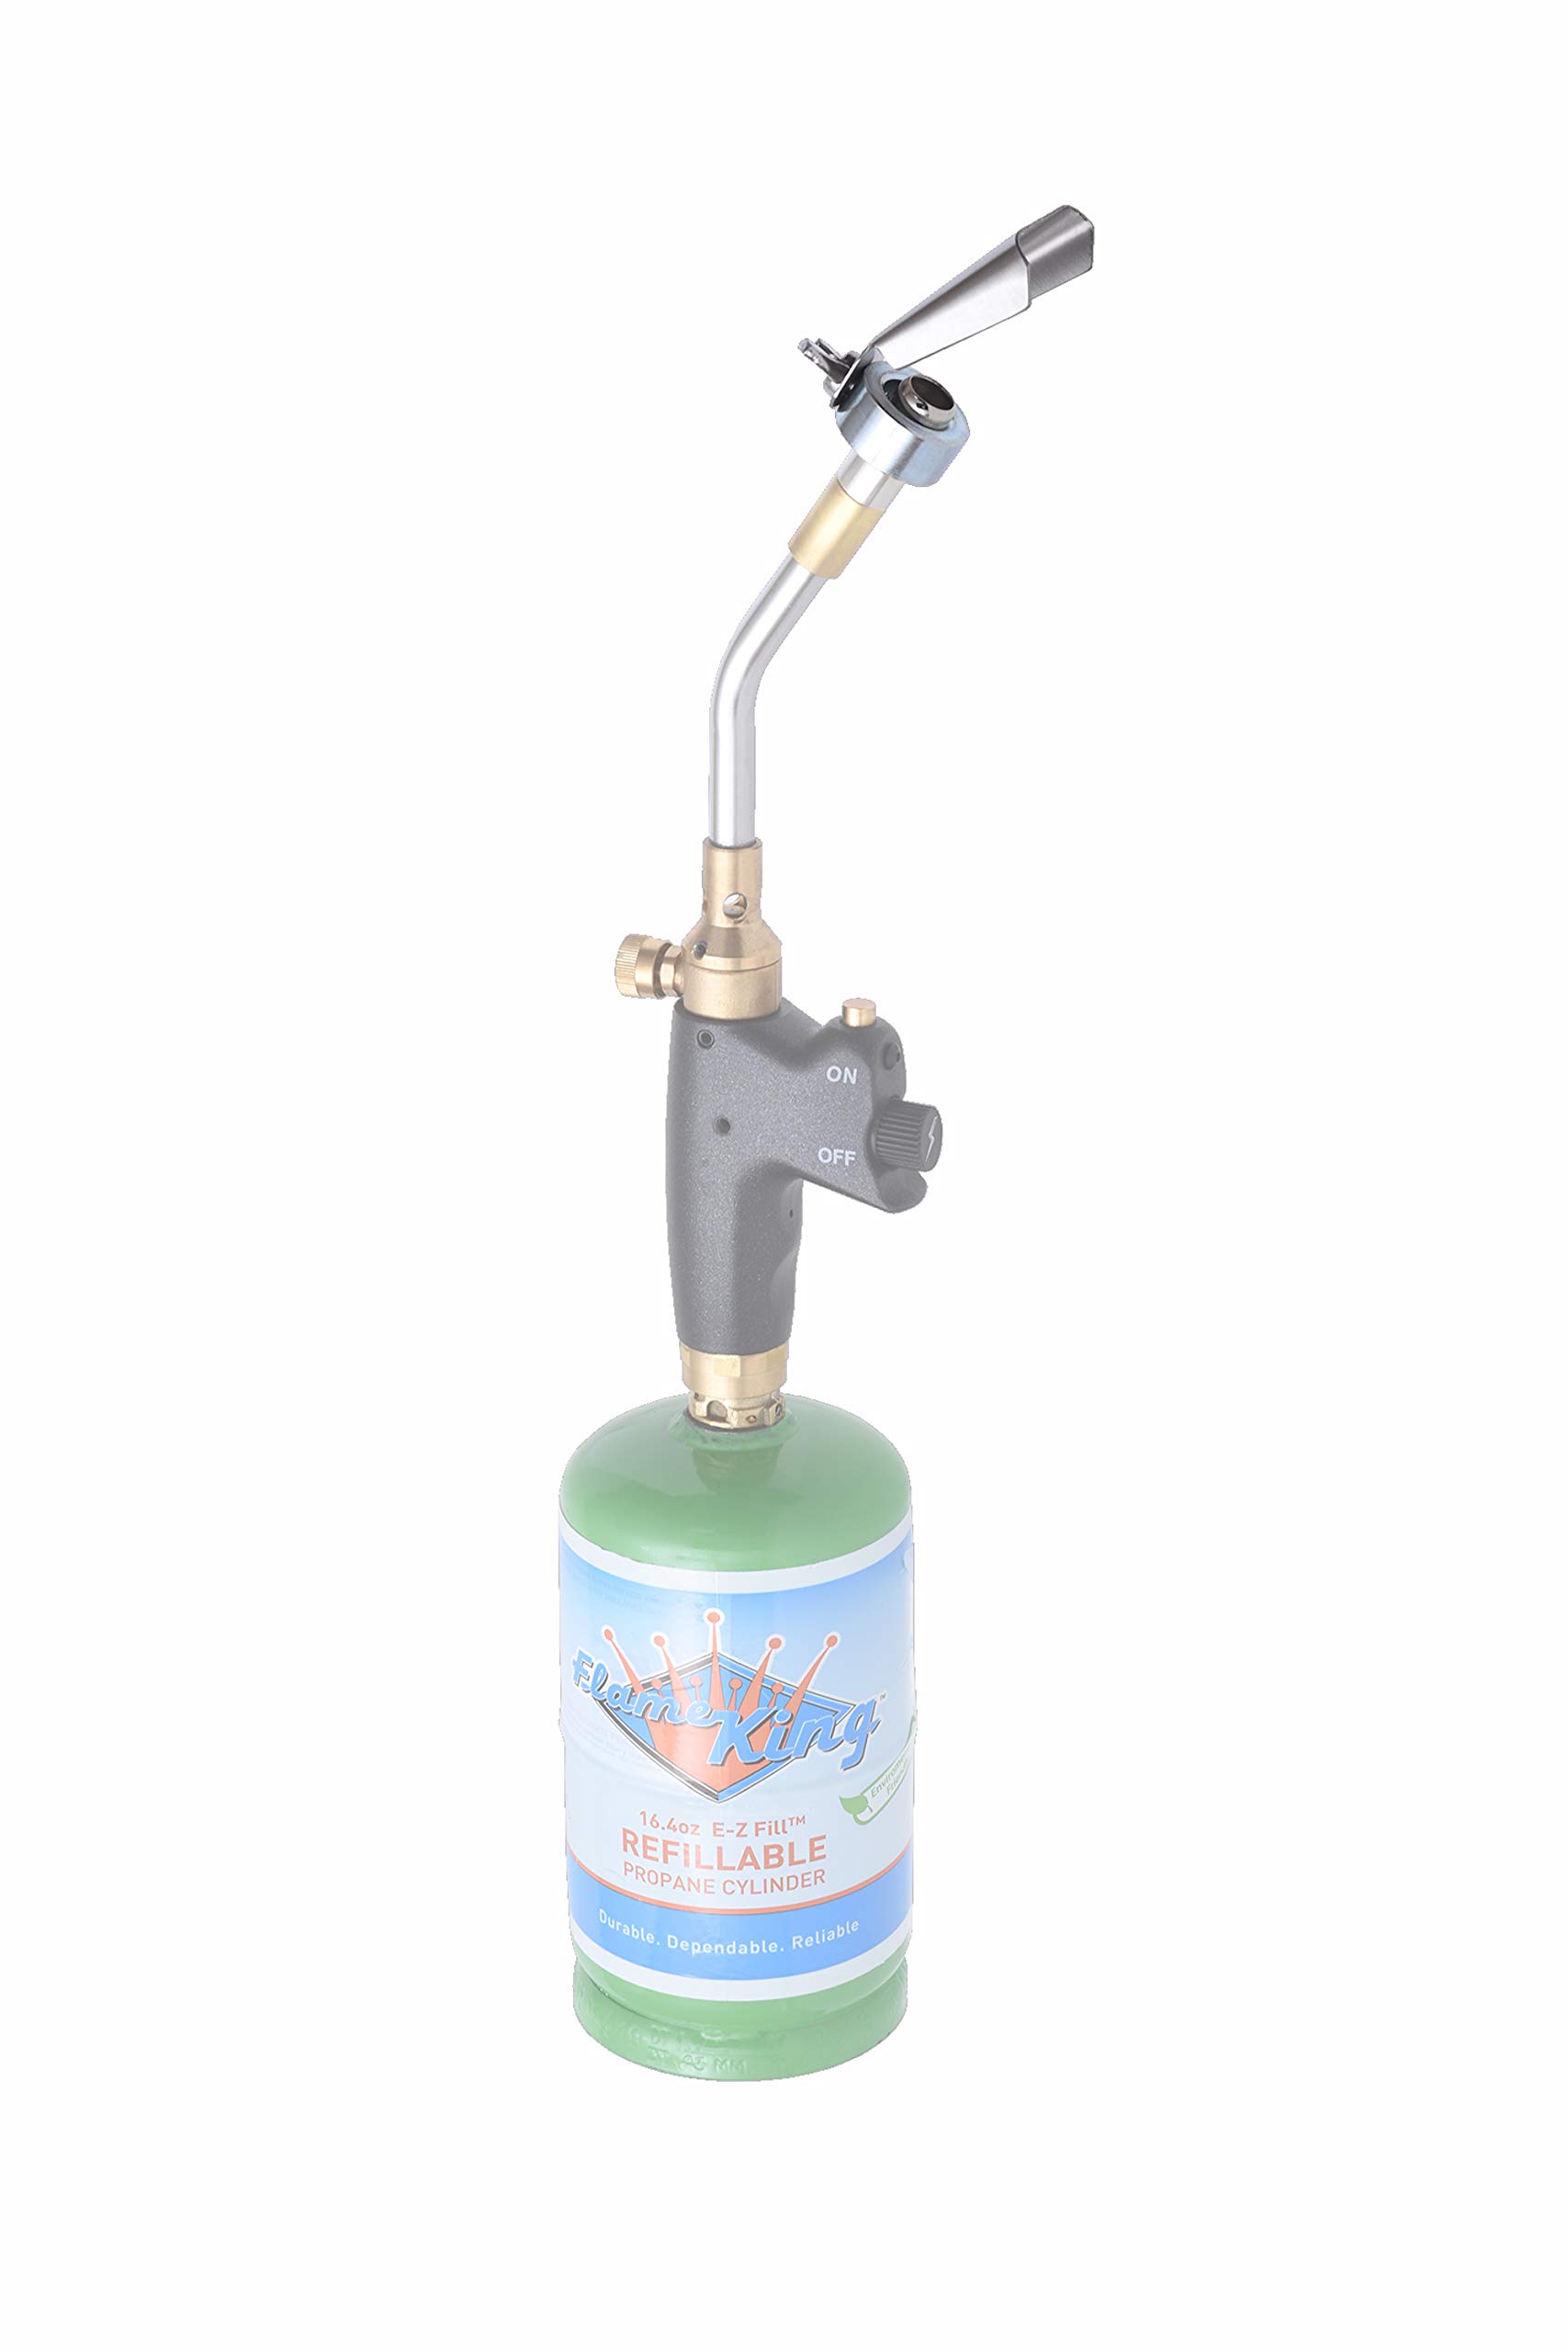 Flame King Searer Attachment for Handheld Blowtorches, Works with Butane and Propane, Easy to Use and Adjust, 2